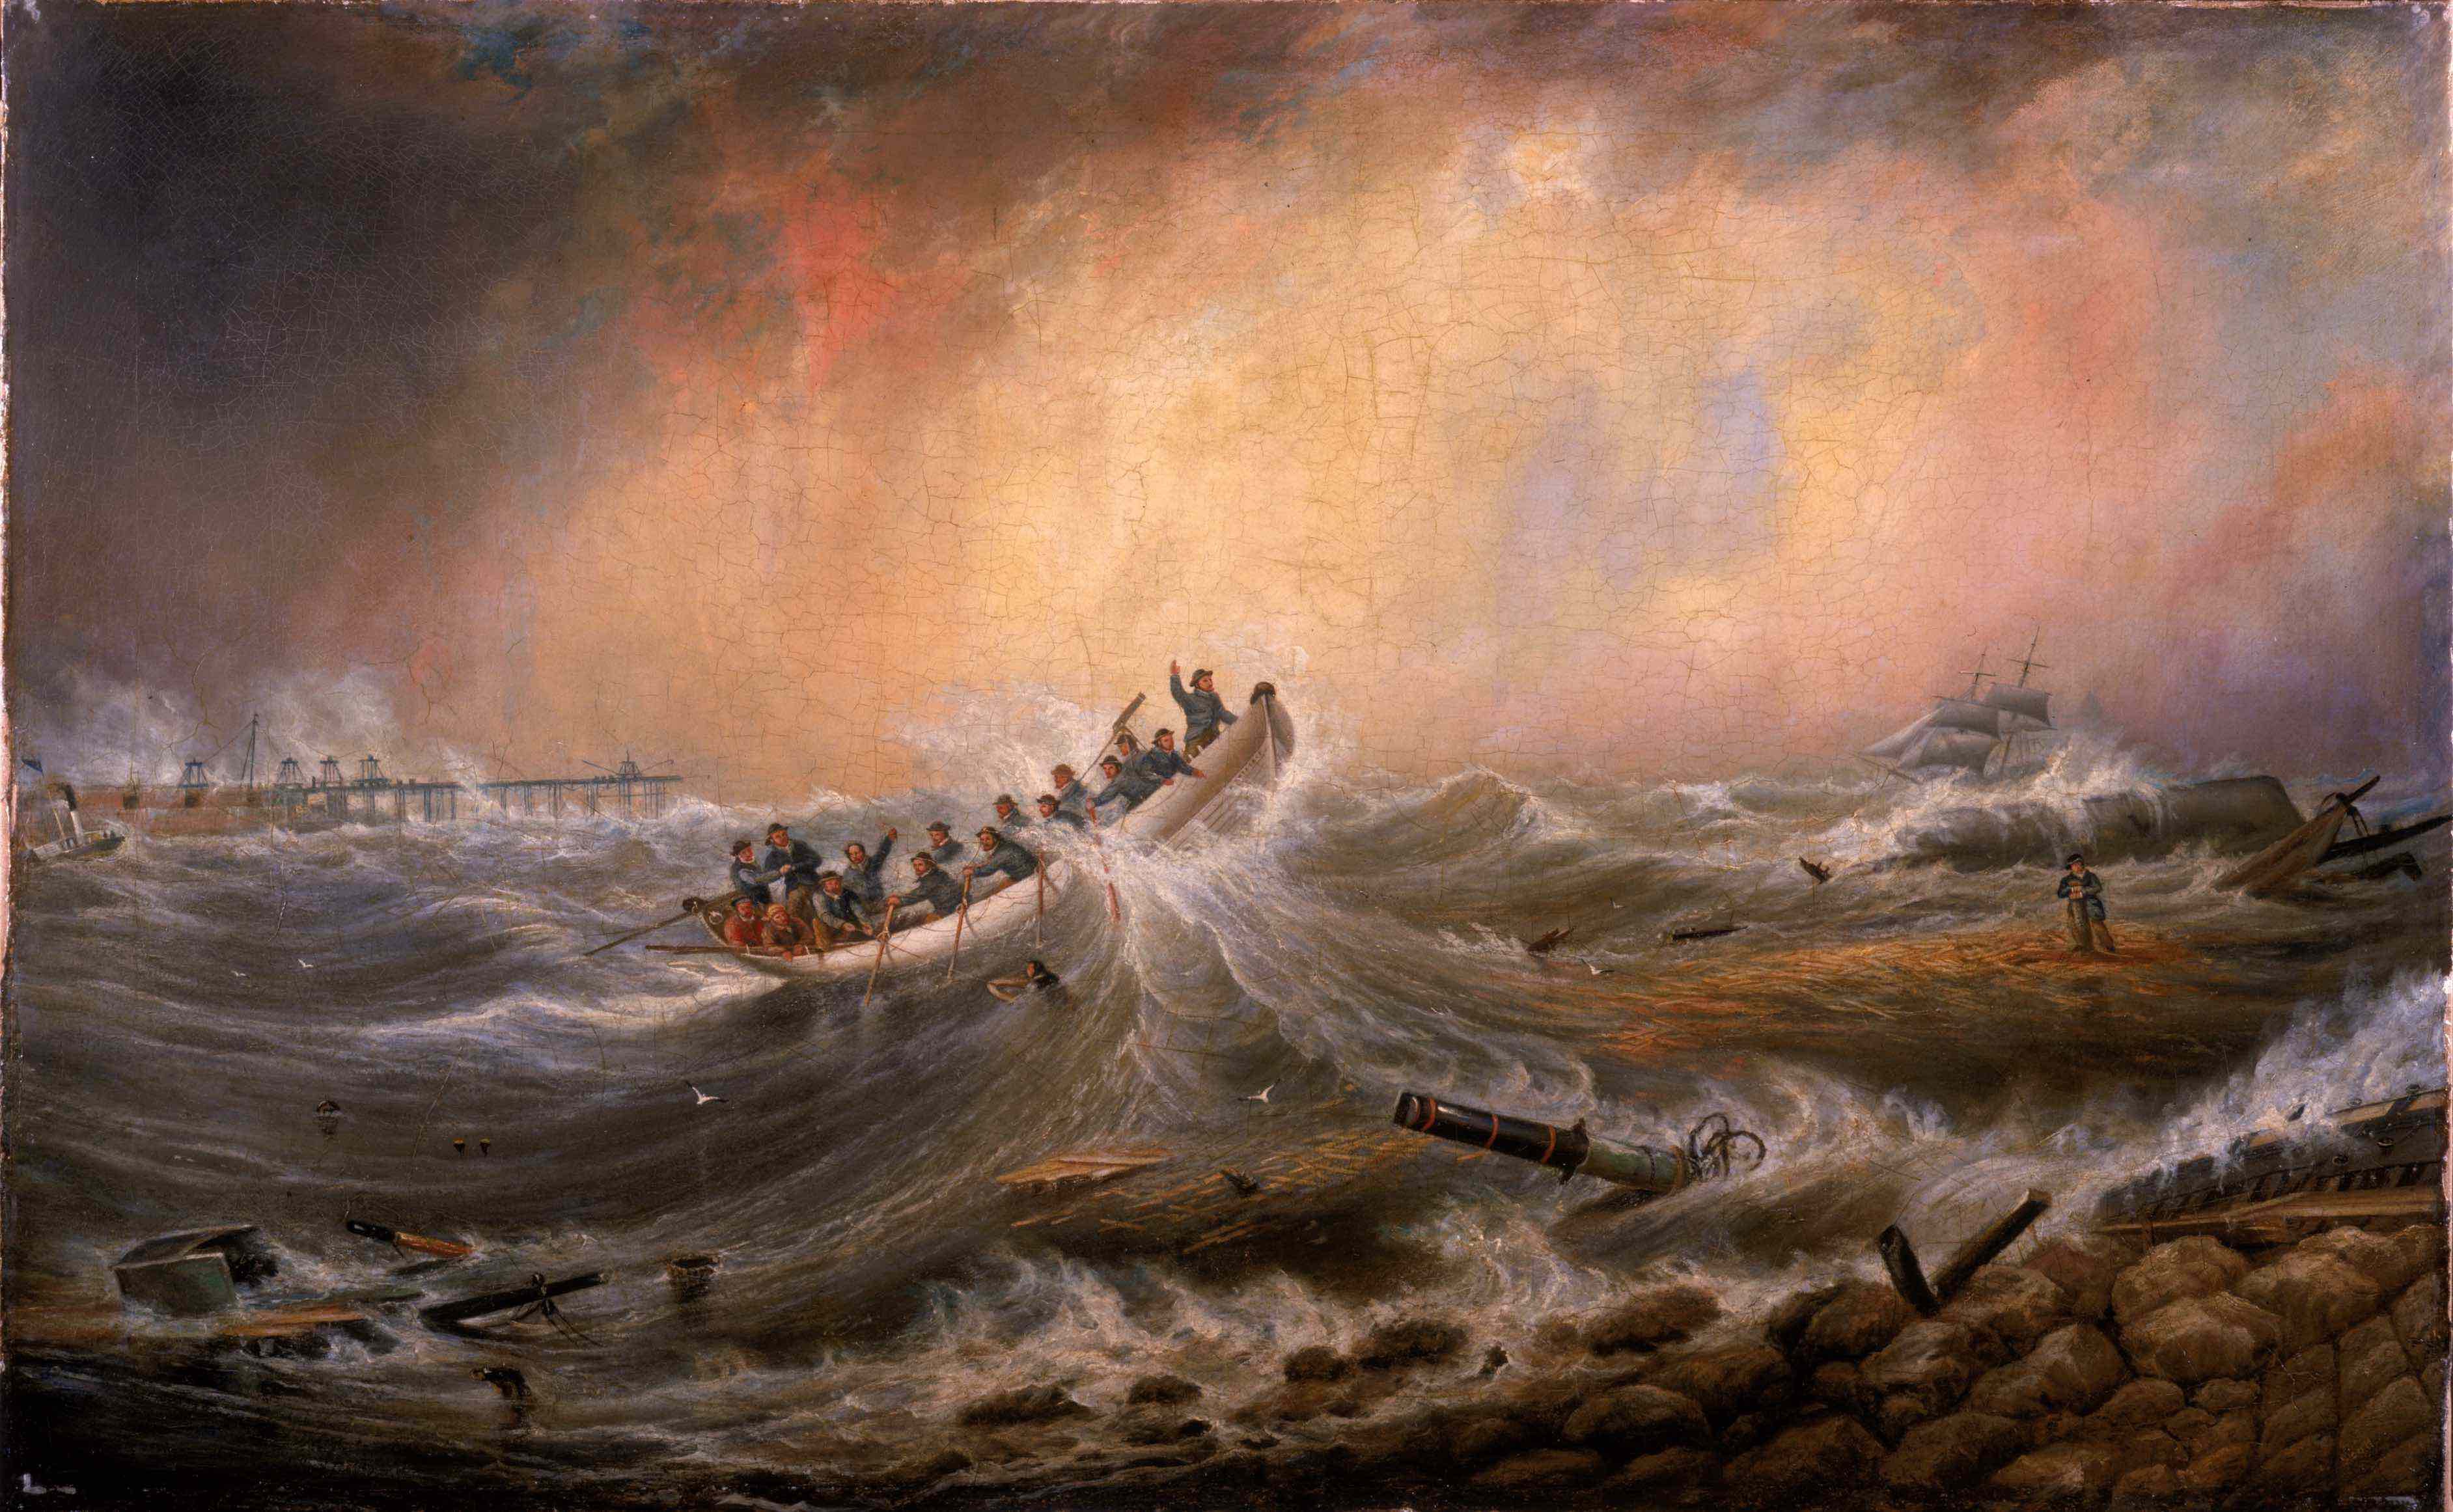 'The Wreck off the South Pier', by John Scott. 